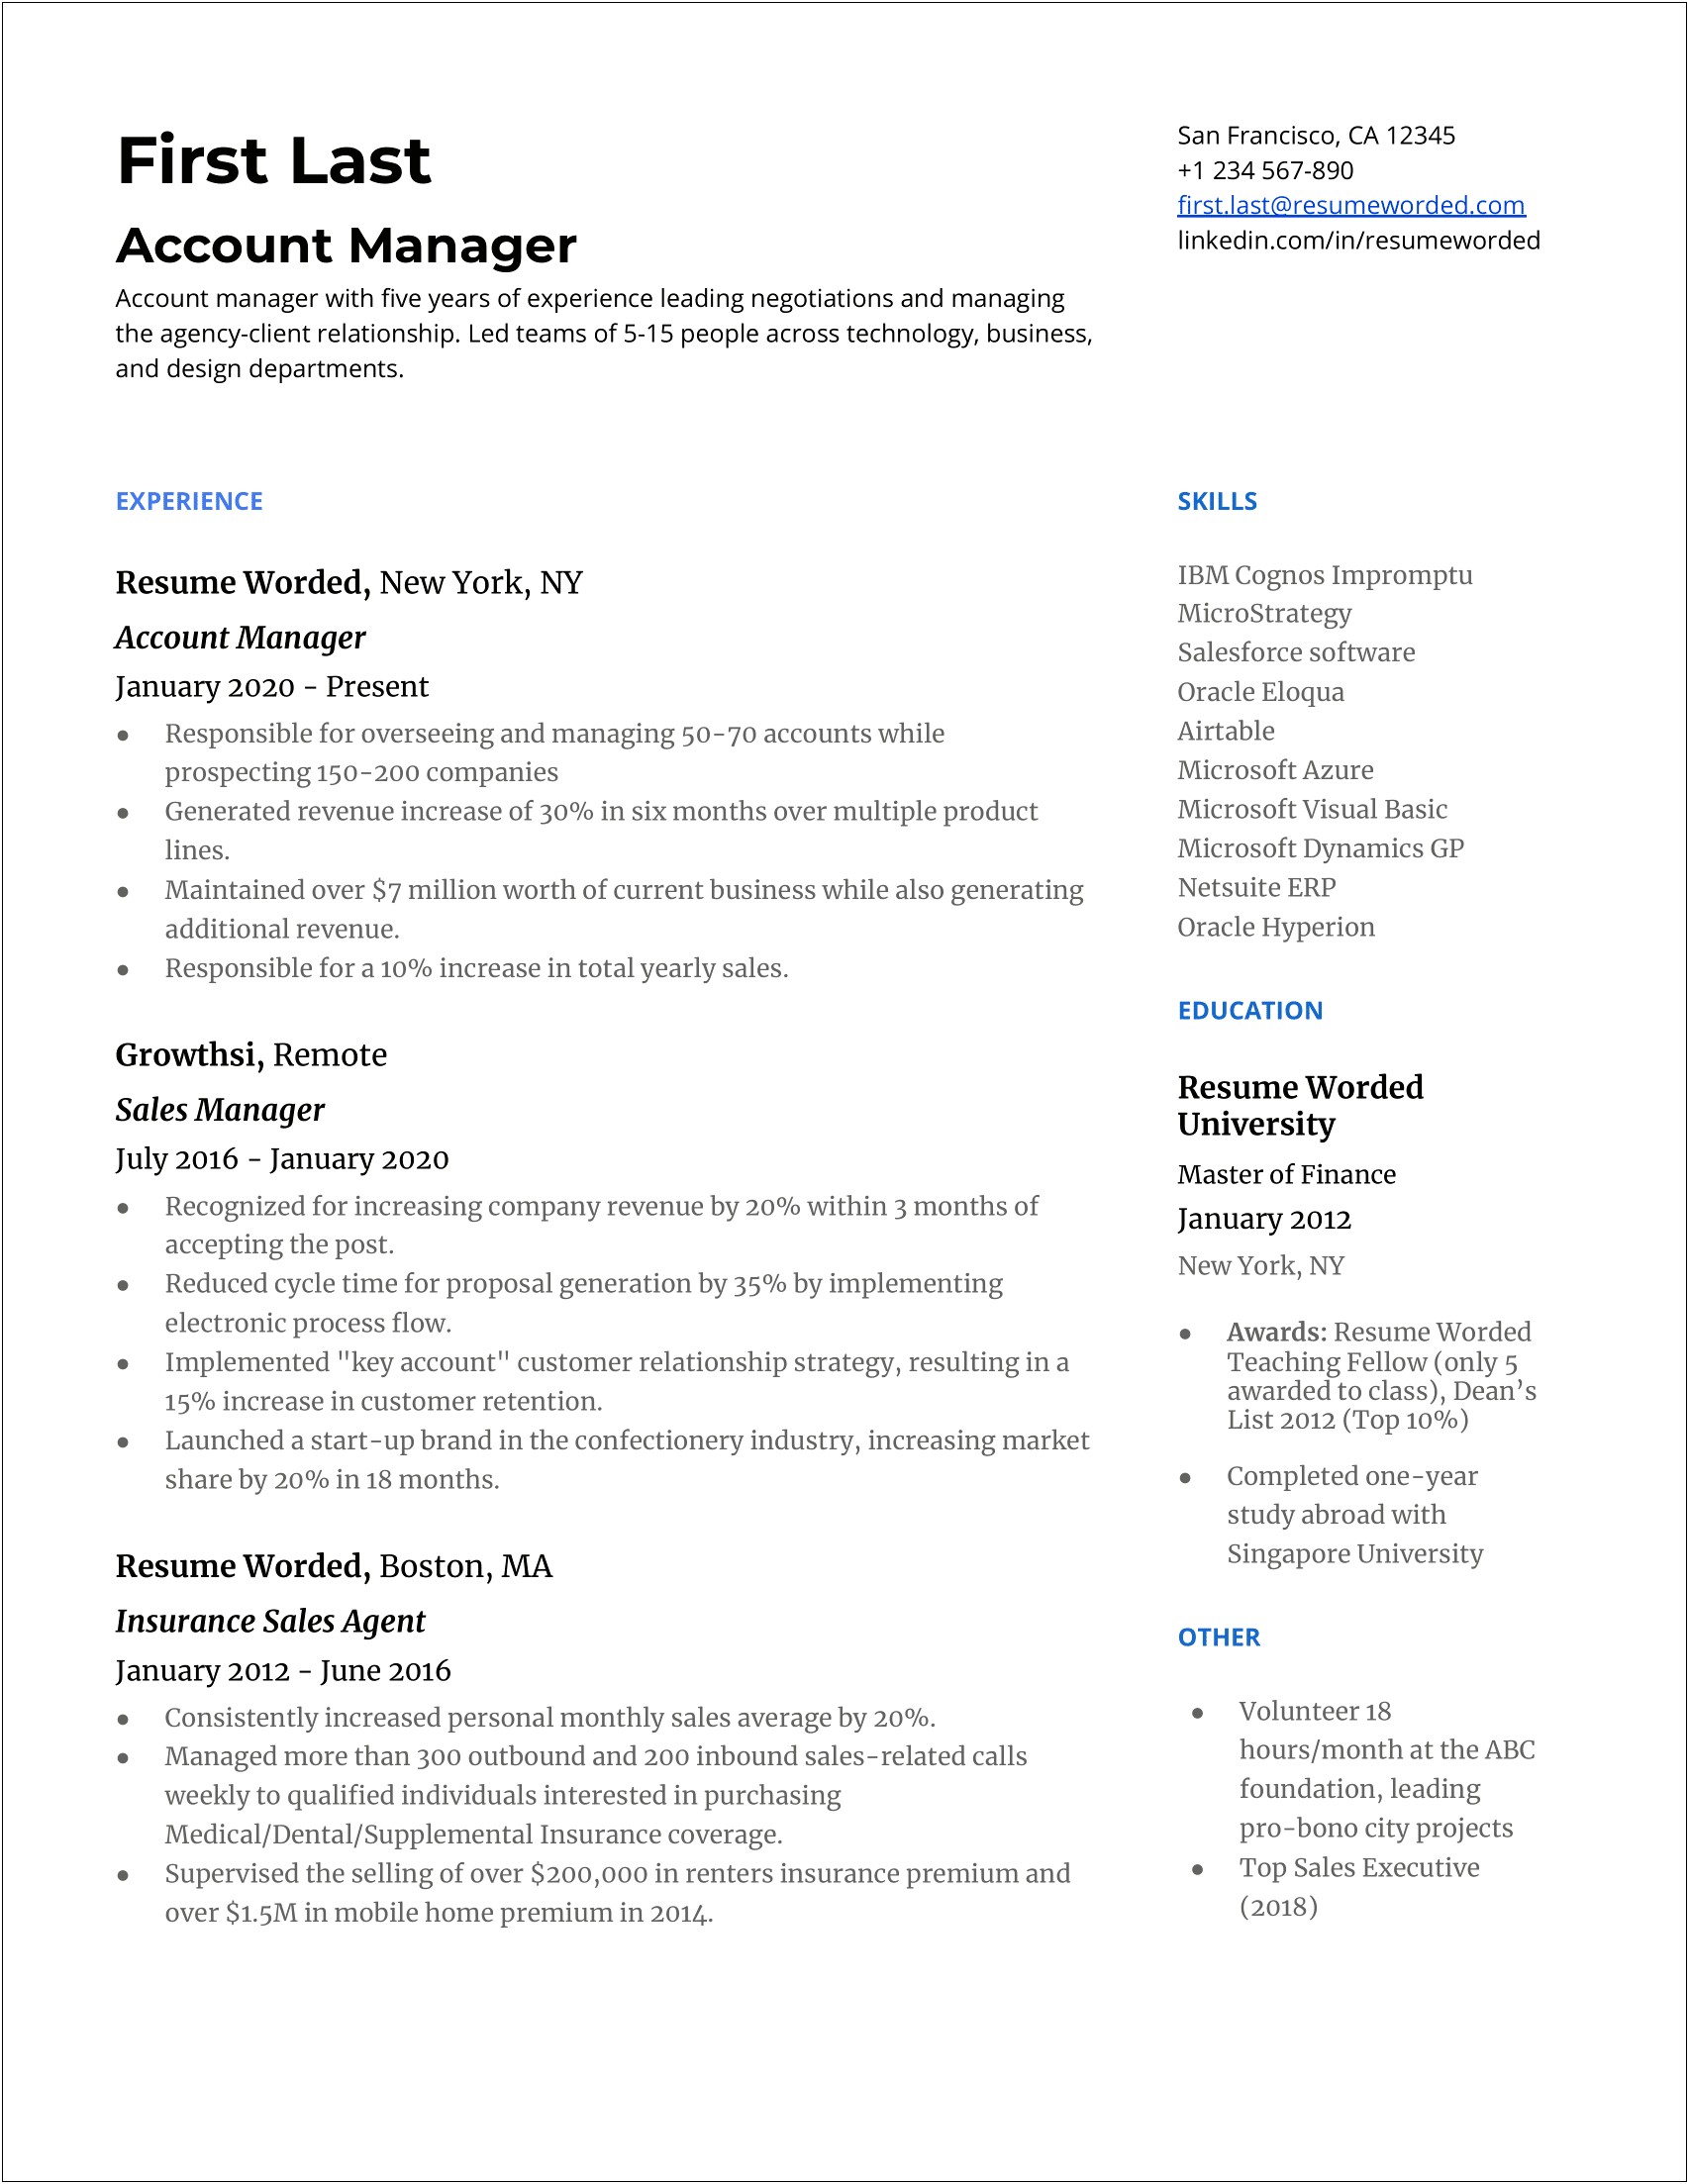 Individual Skills For Resume Account Manager